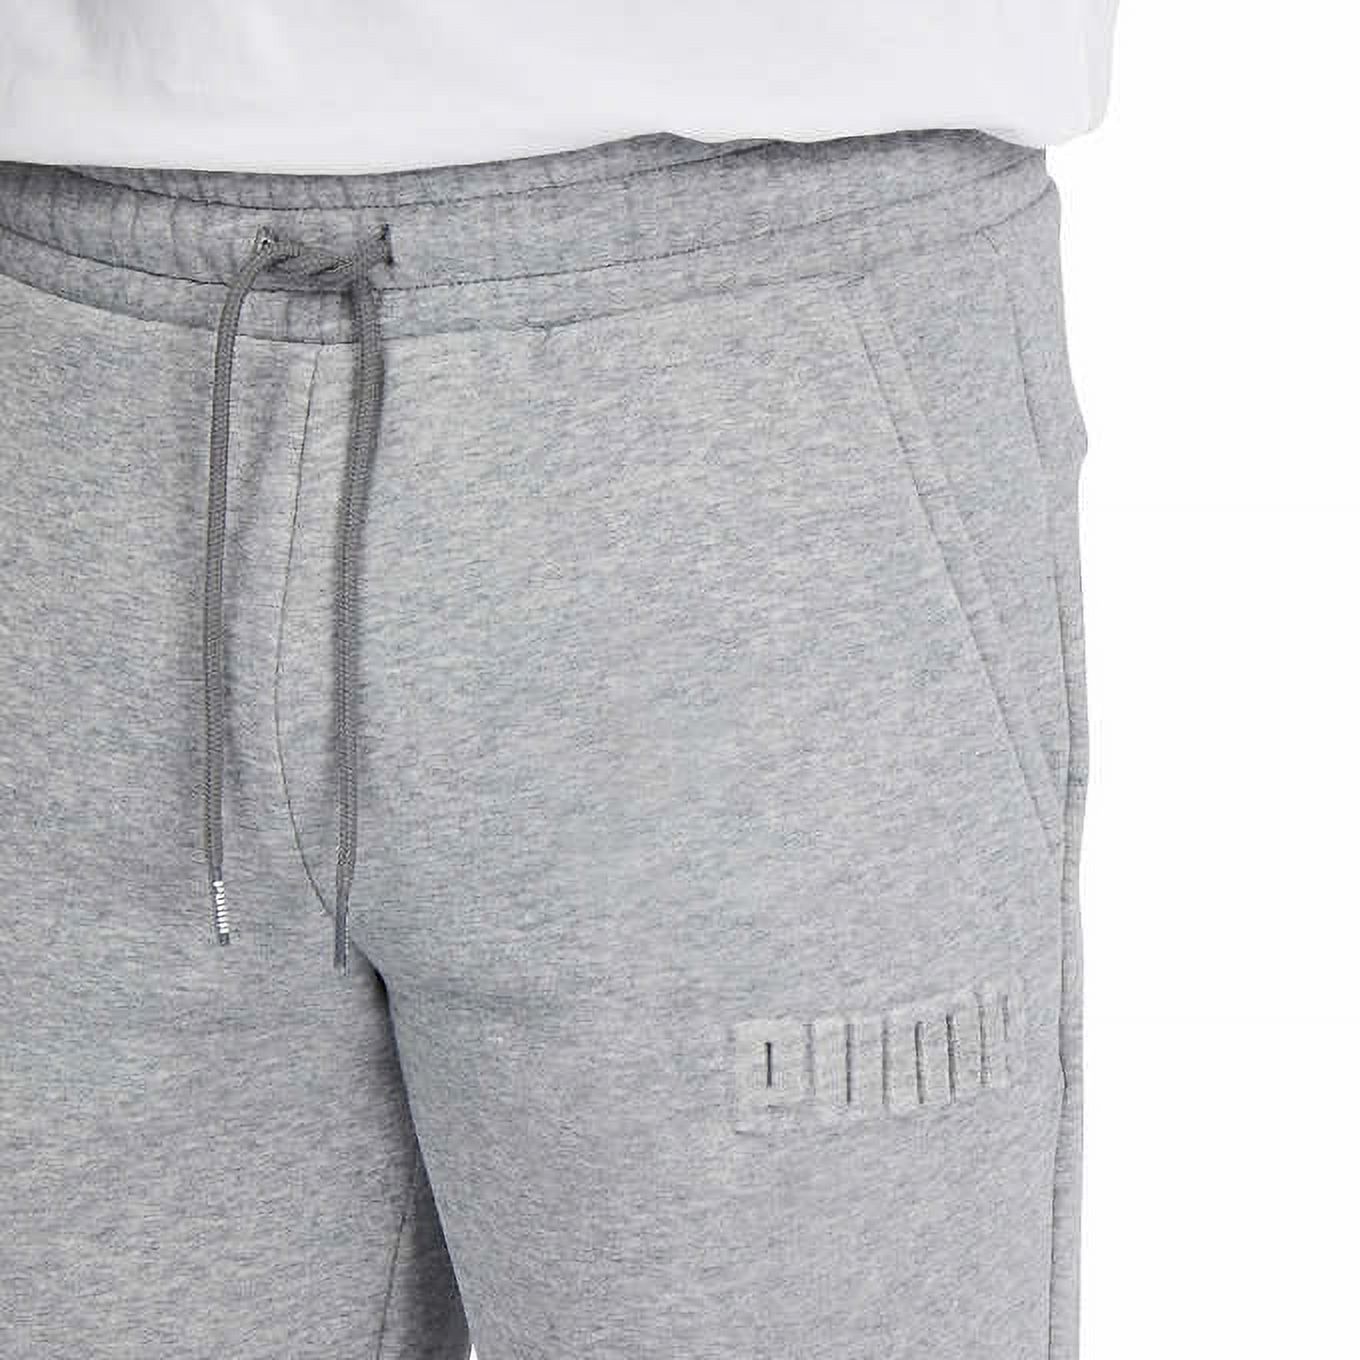 Puma Men's Fleece Lined Tapered Leg Cuffed Athletic Sweatpants (Gray, X-Large) - image 3 of 4